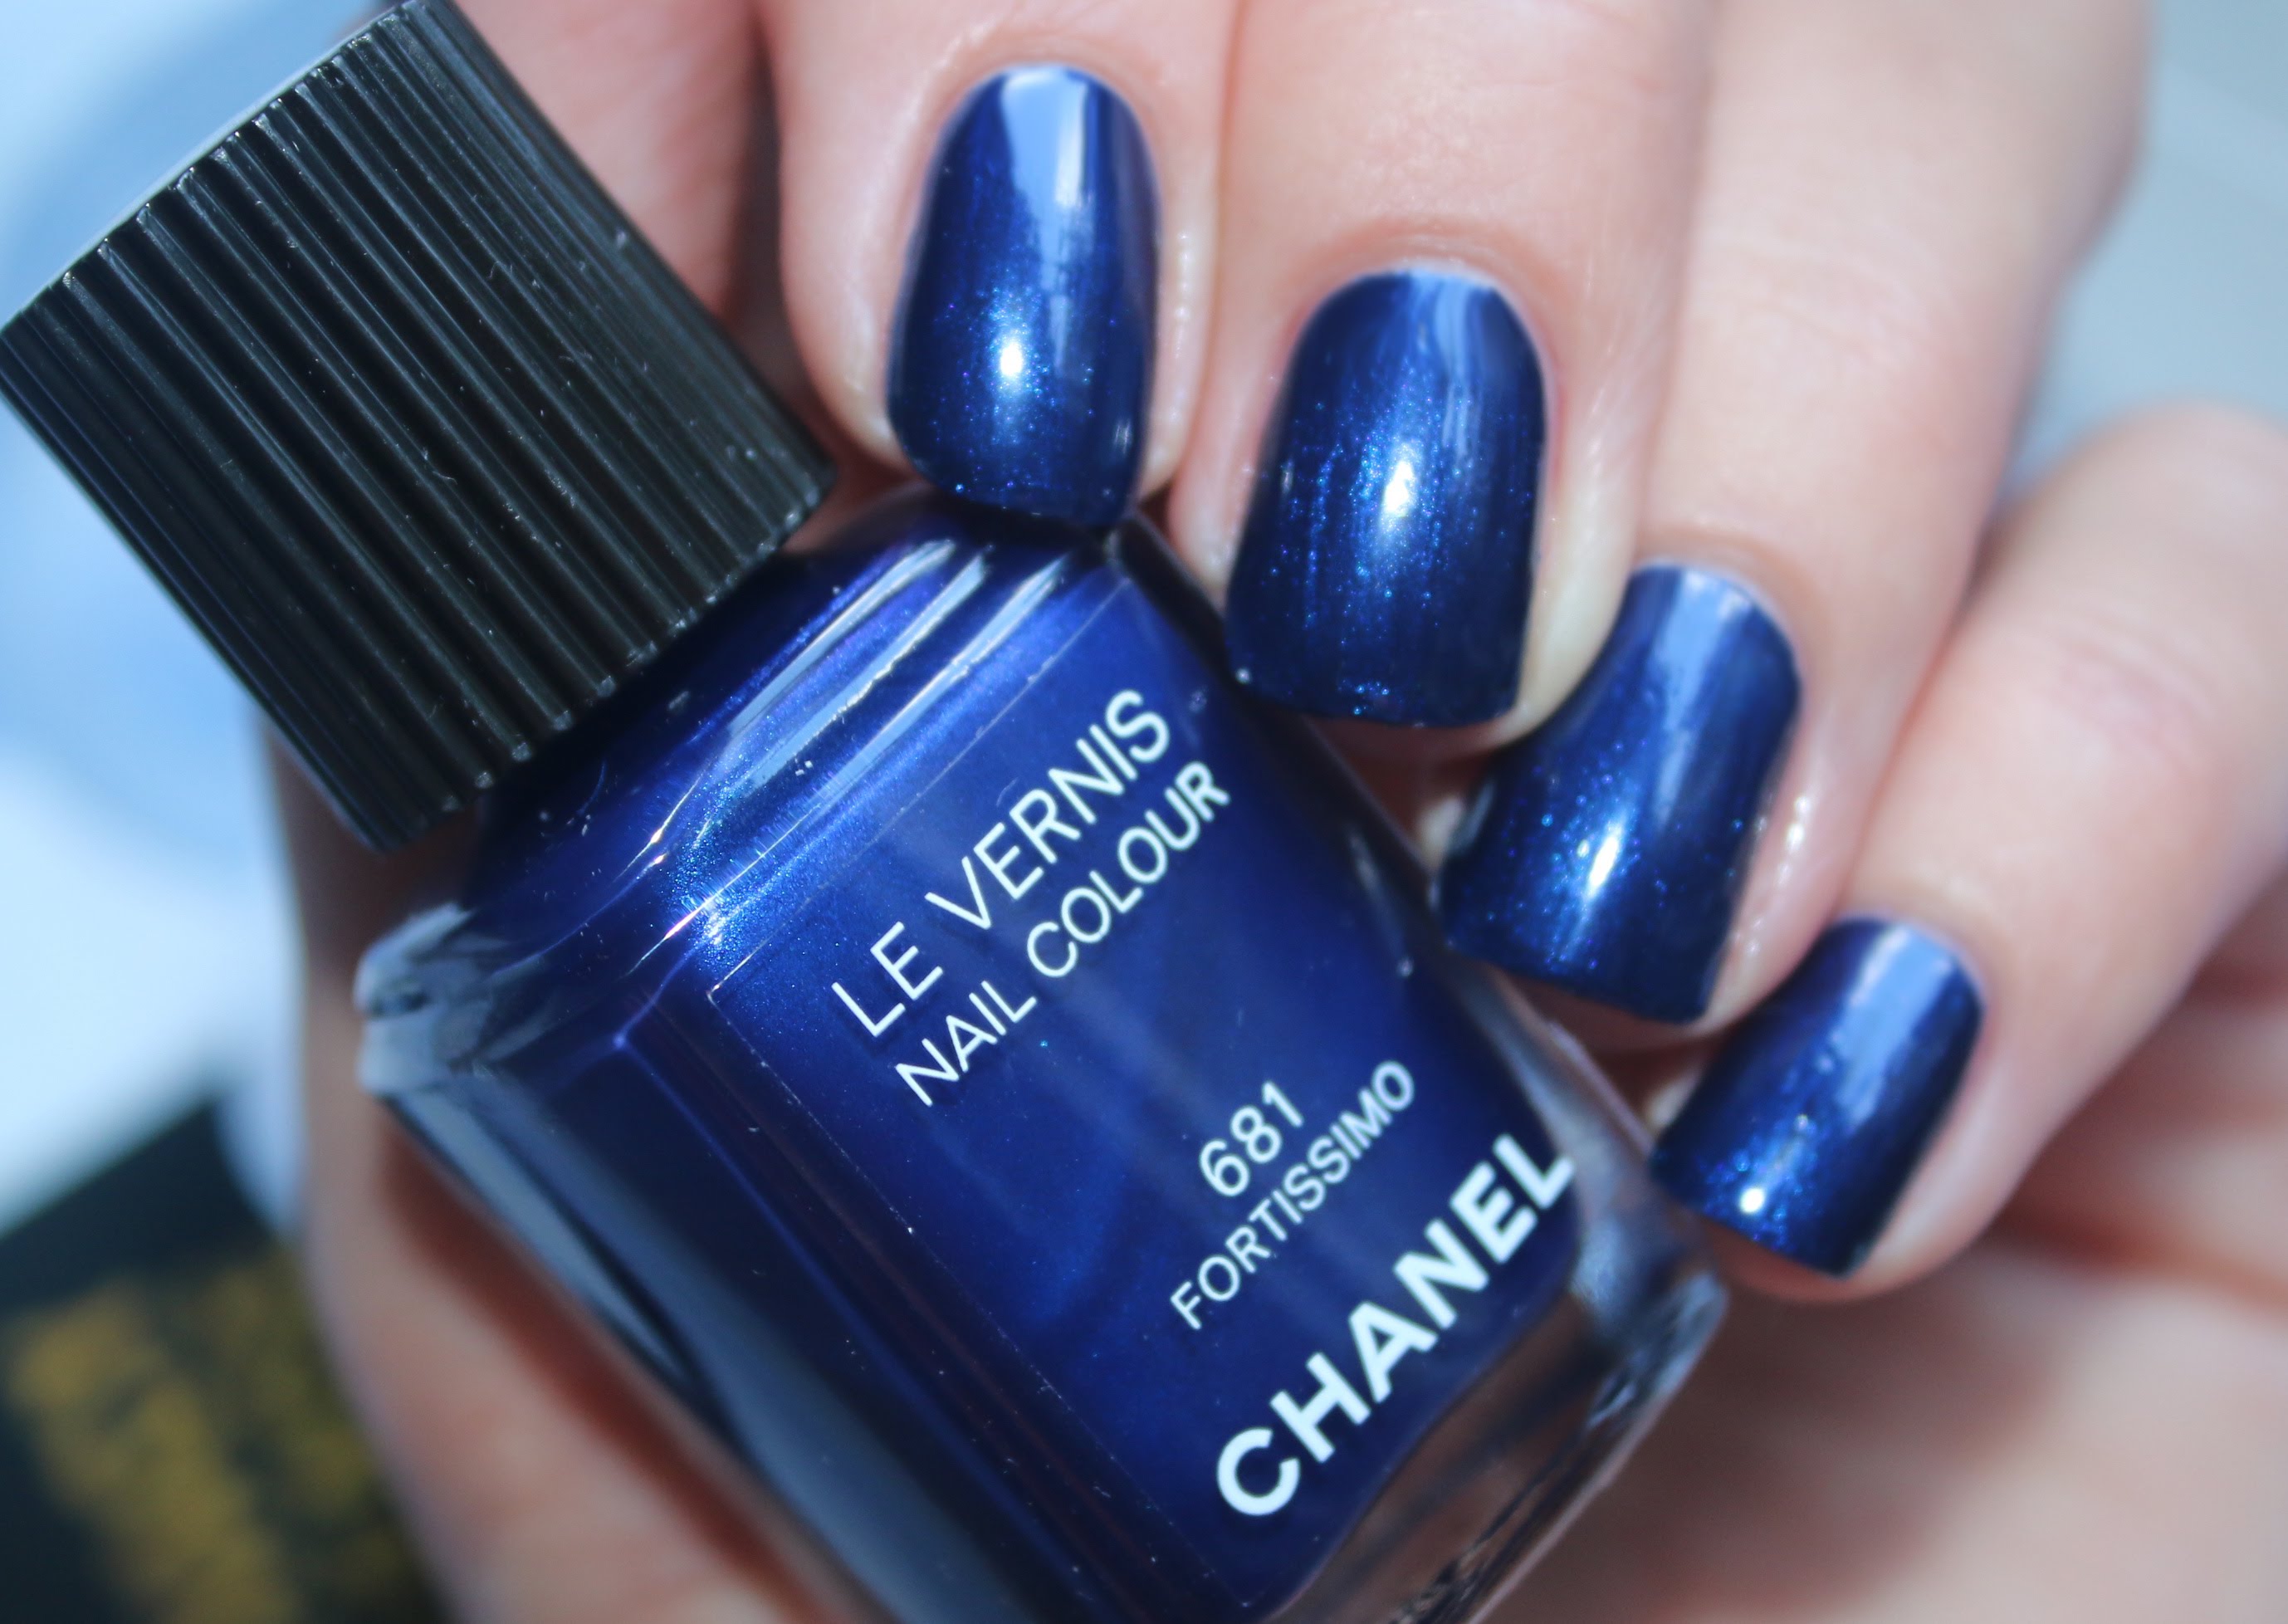 Chanel Le Fortissimo « Passion4luxus